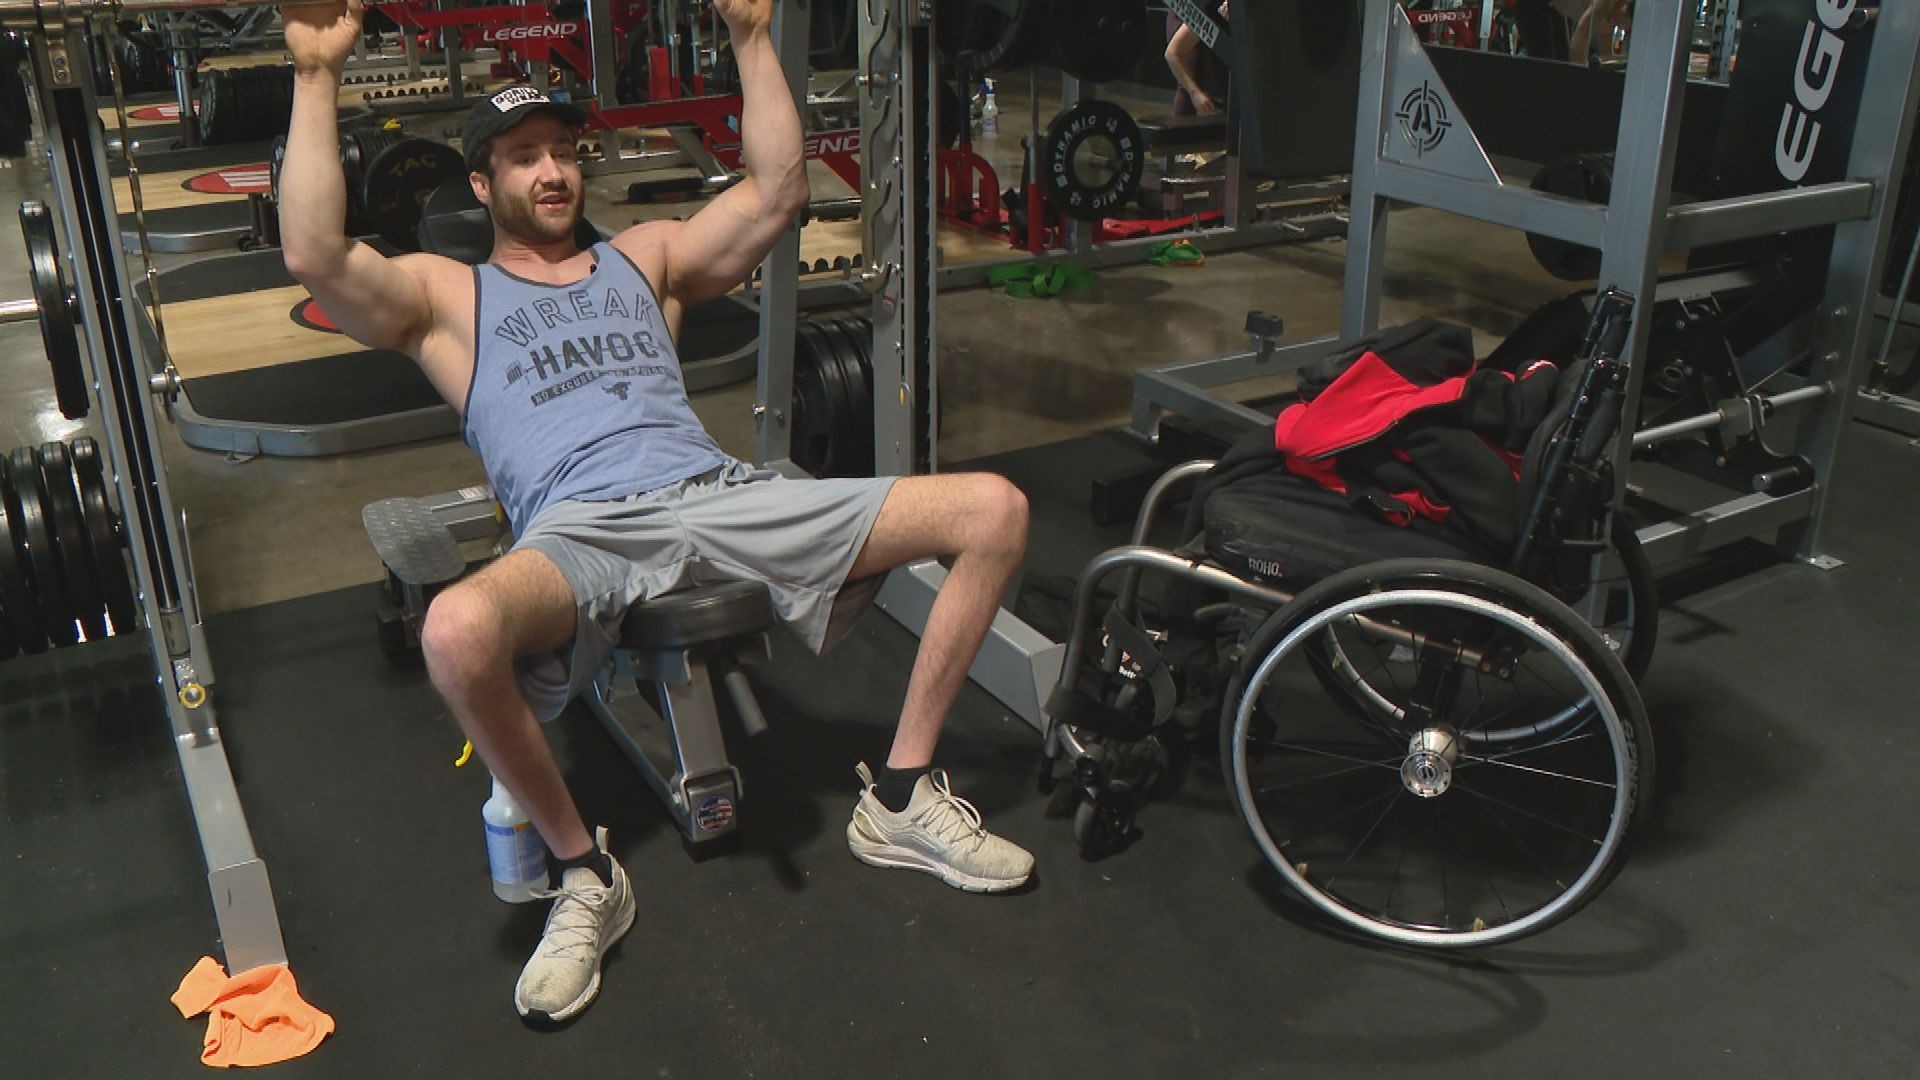 Brad Betts was paralyzed when a tree fell and hit a shed he was in during a storm.